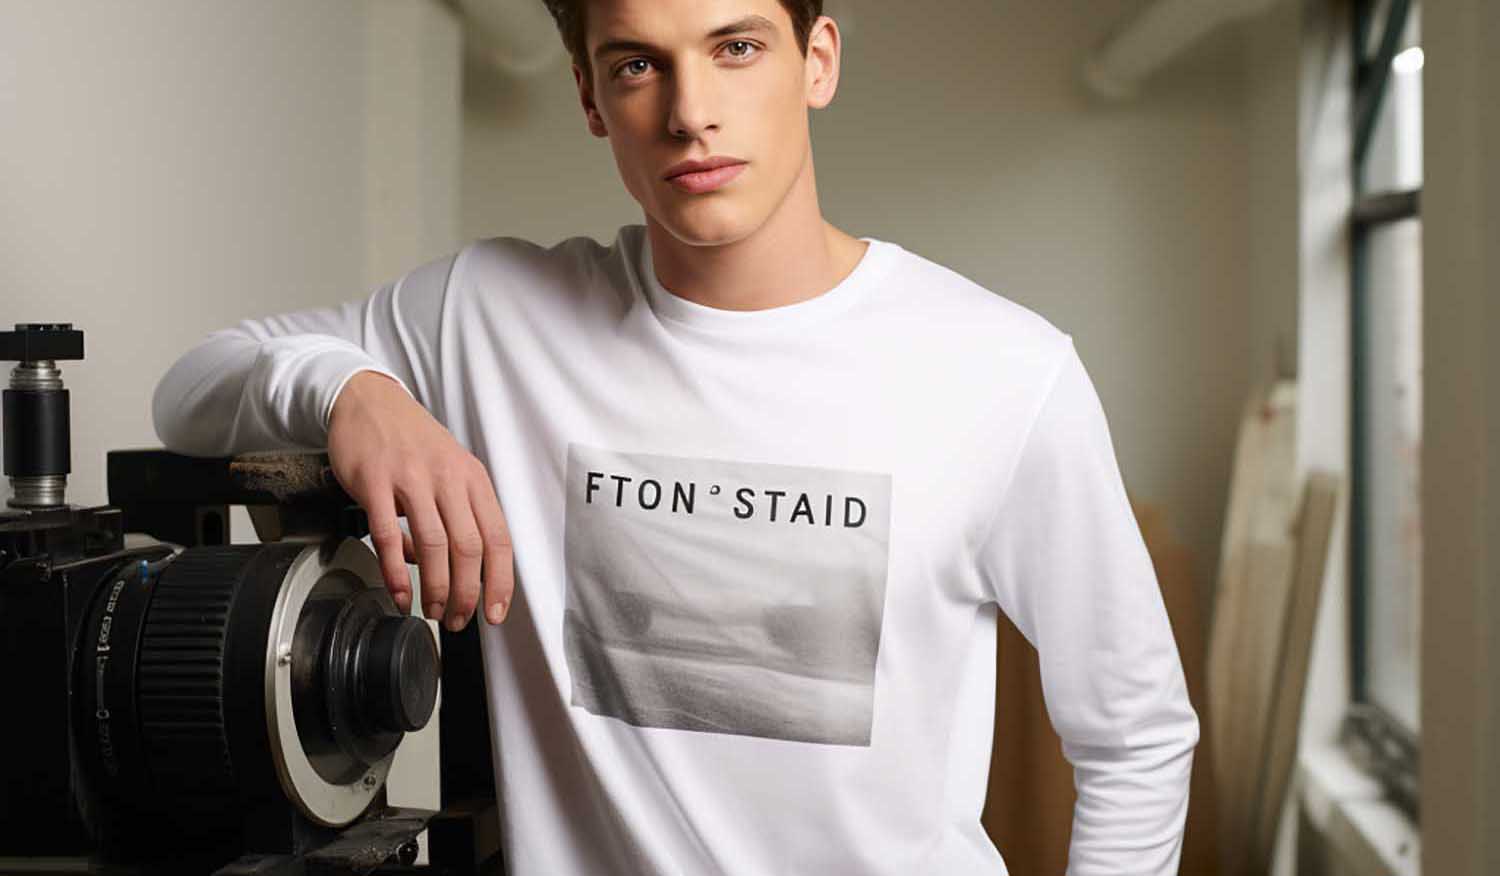 Custom Long Sleeve T-Shirts: Express Yourself in Style